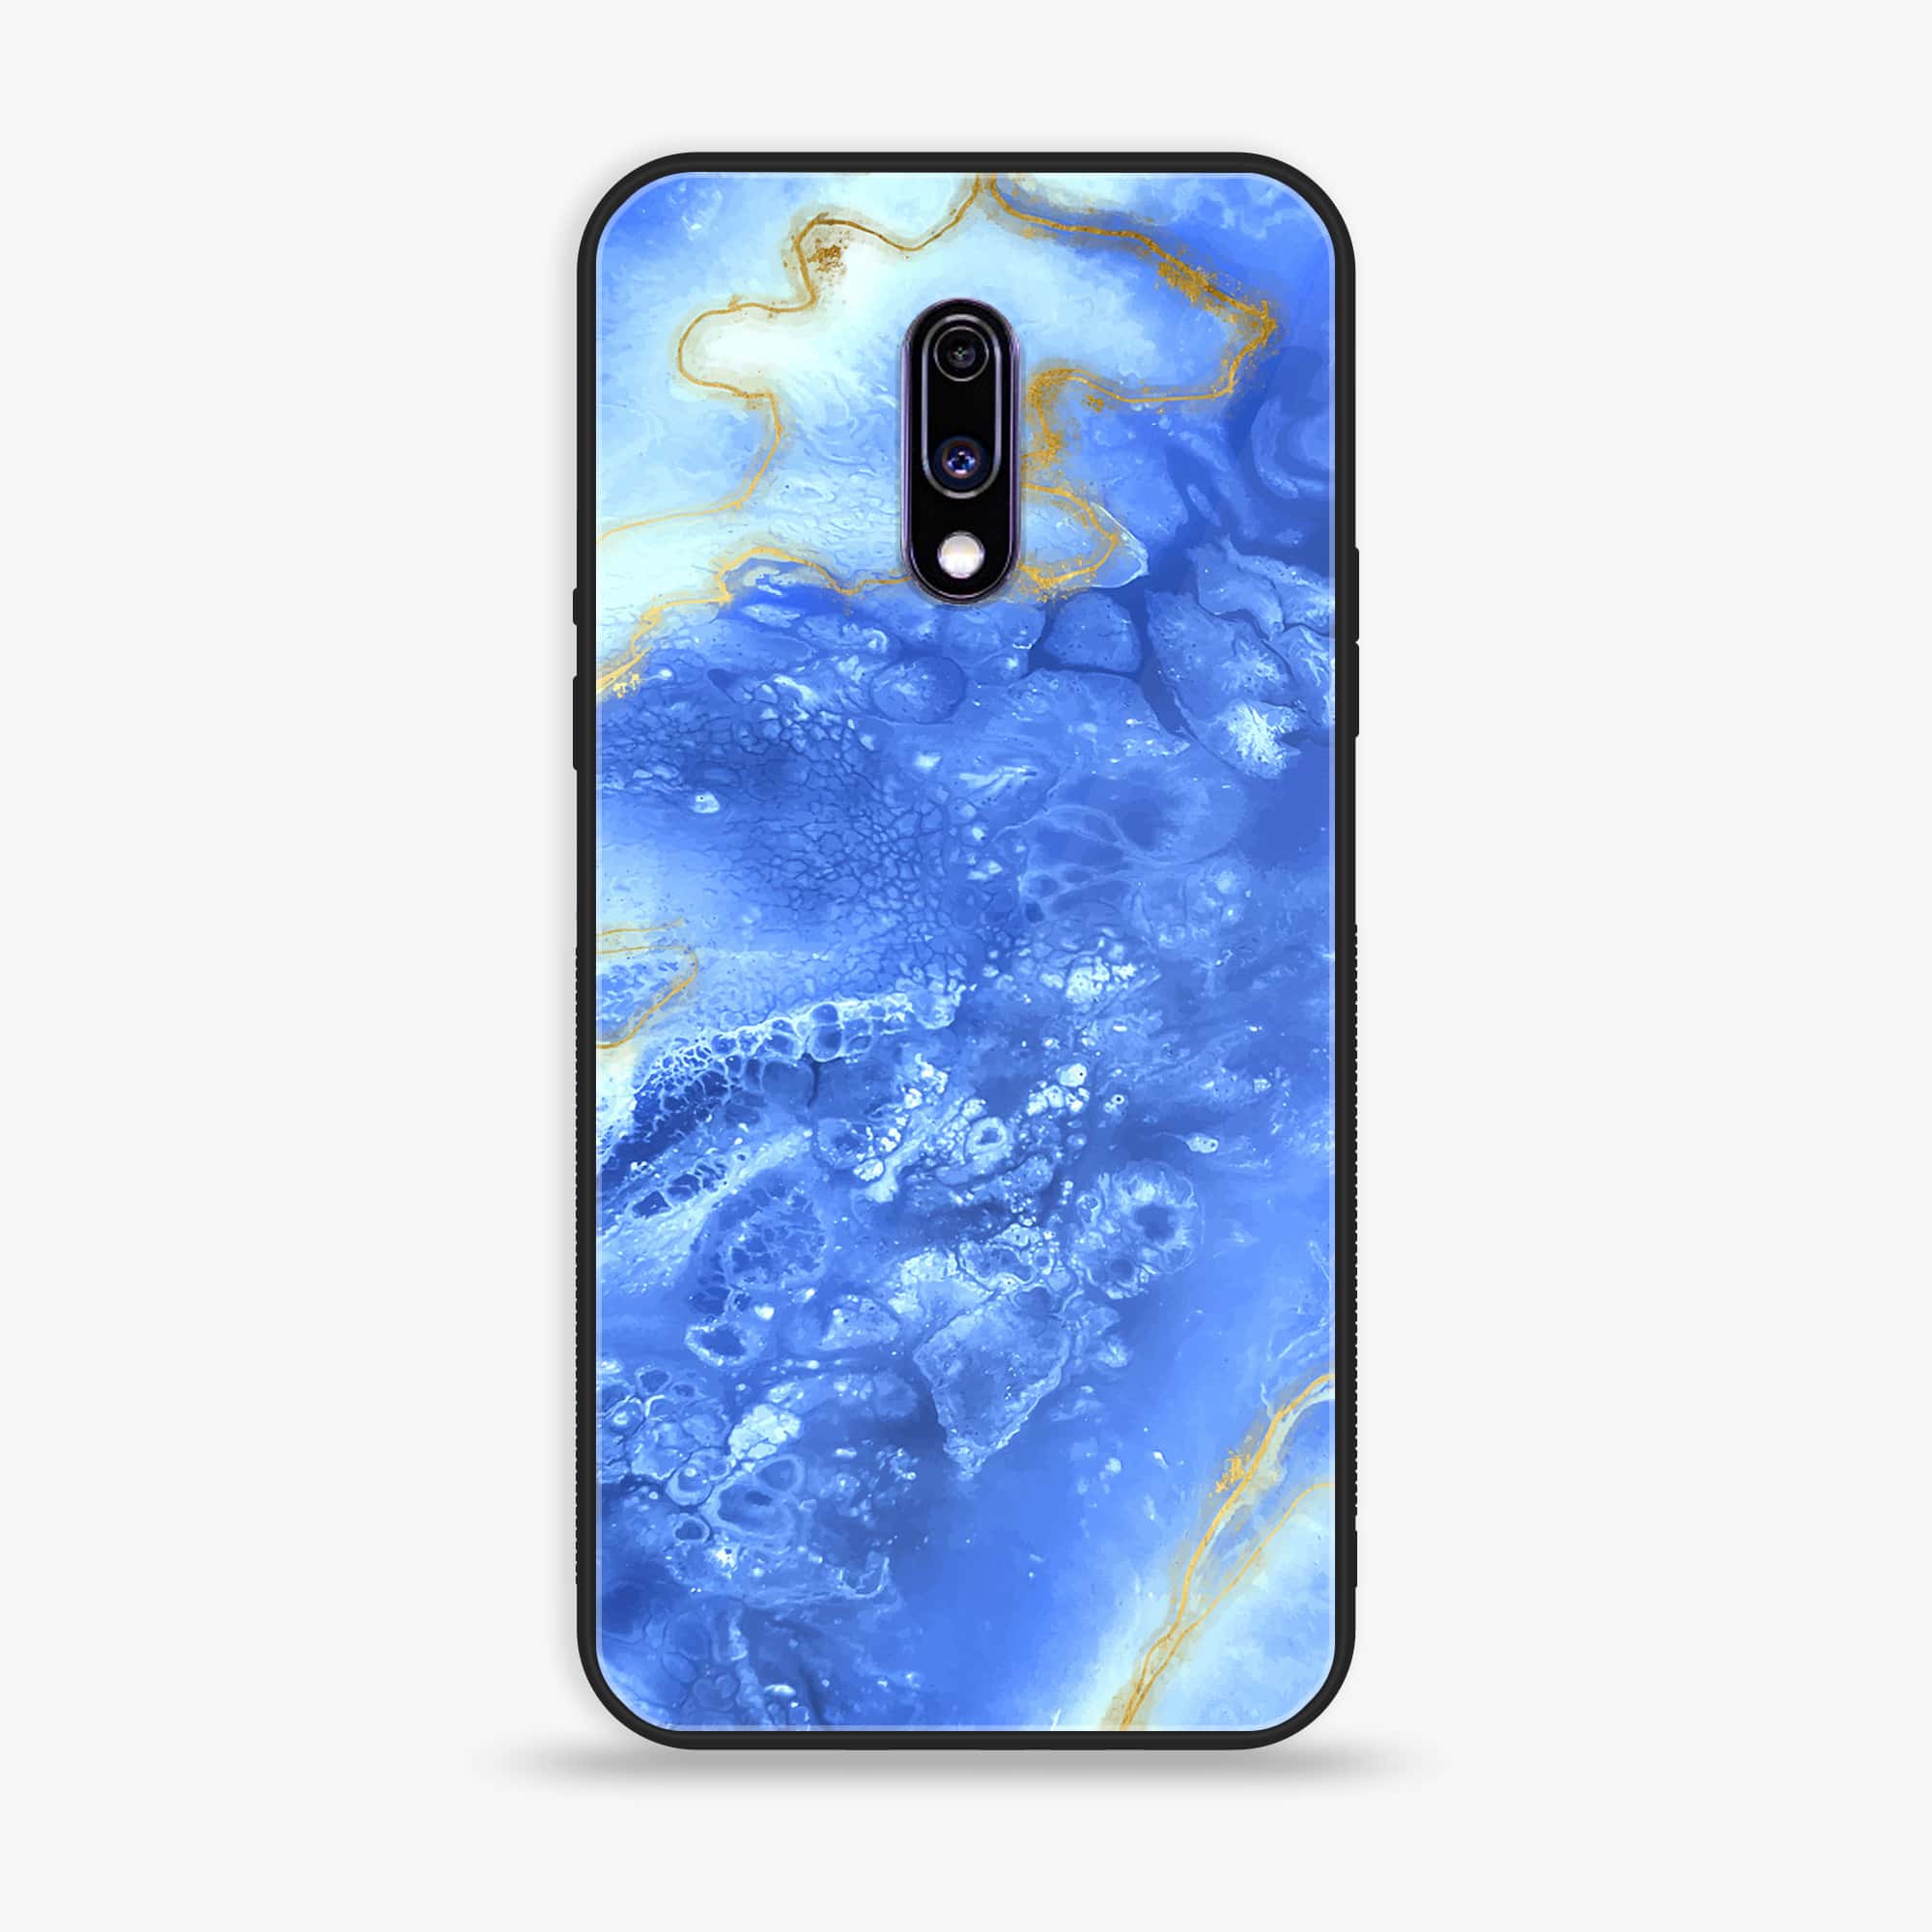 OnePlus 7 - Blue Marble Series V 2.0 - Premium Printed Glass soft Bumper shock Proof Case